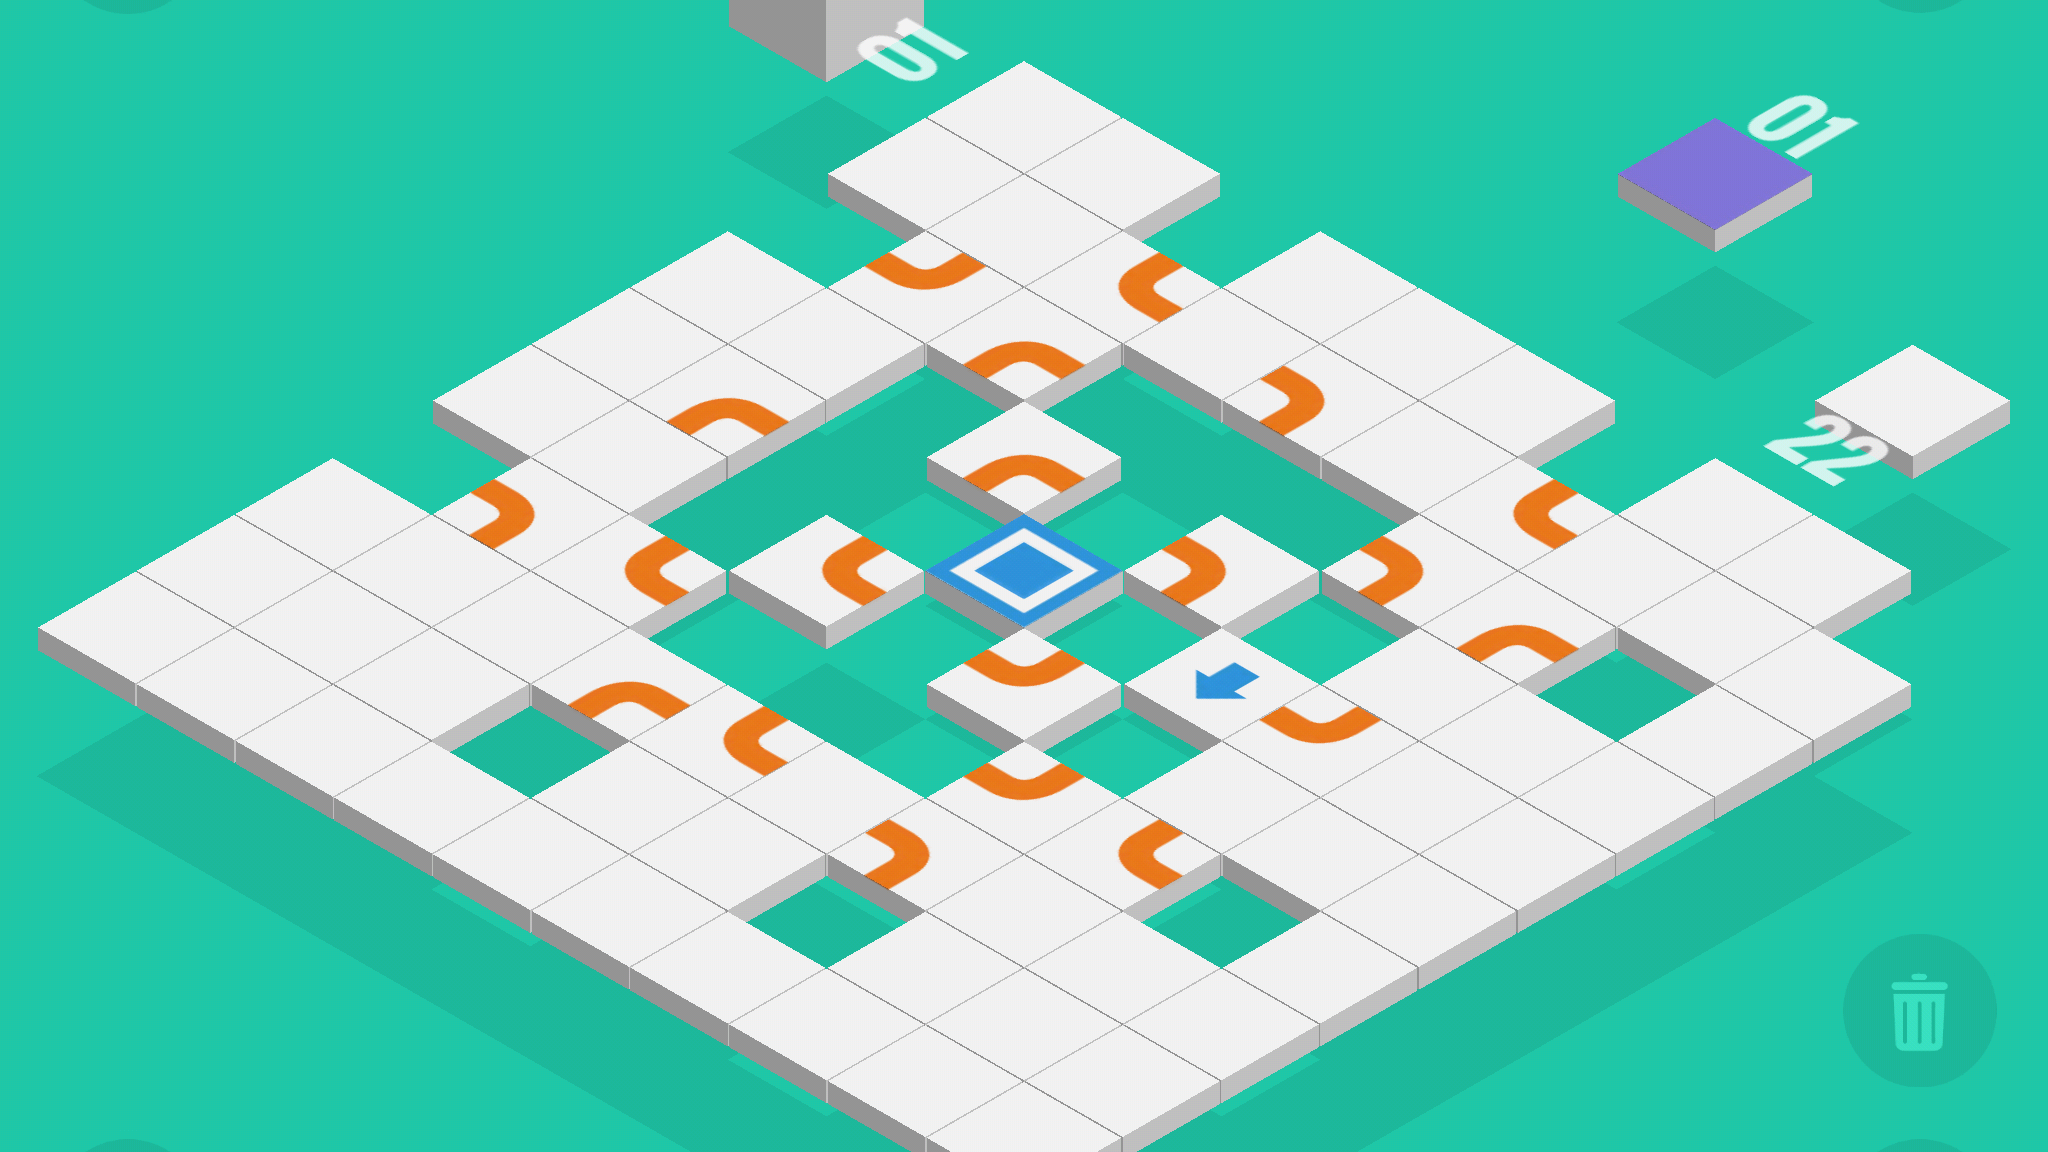 Socioball Review: Rollin’ With Your Homies